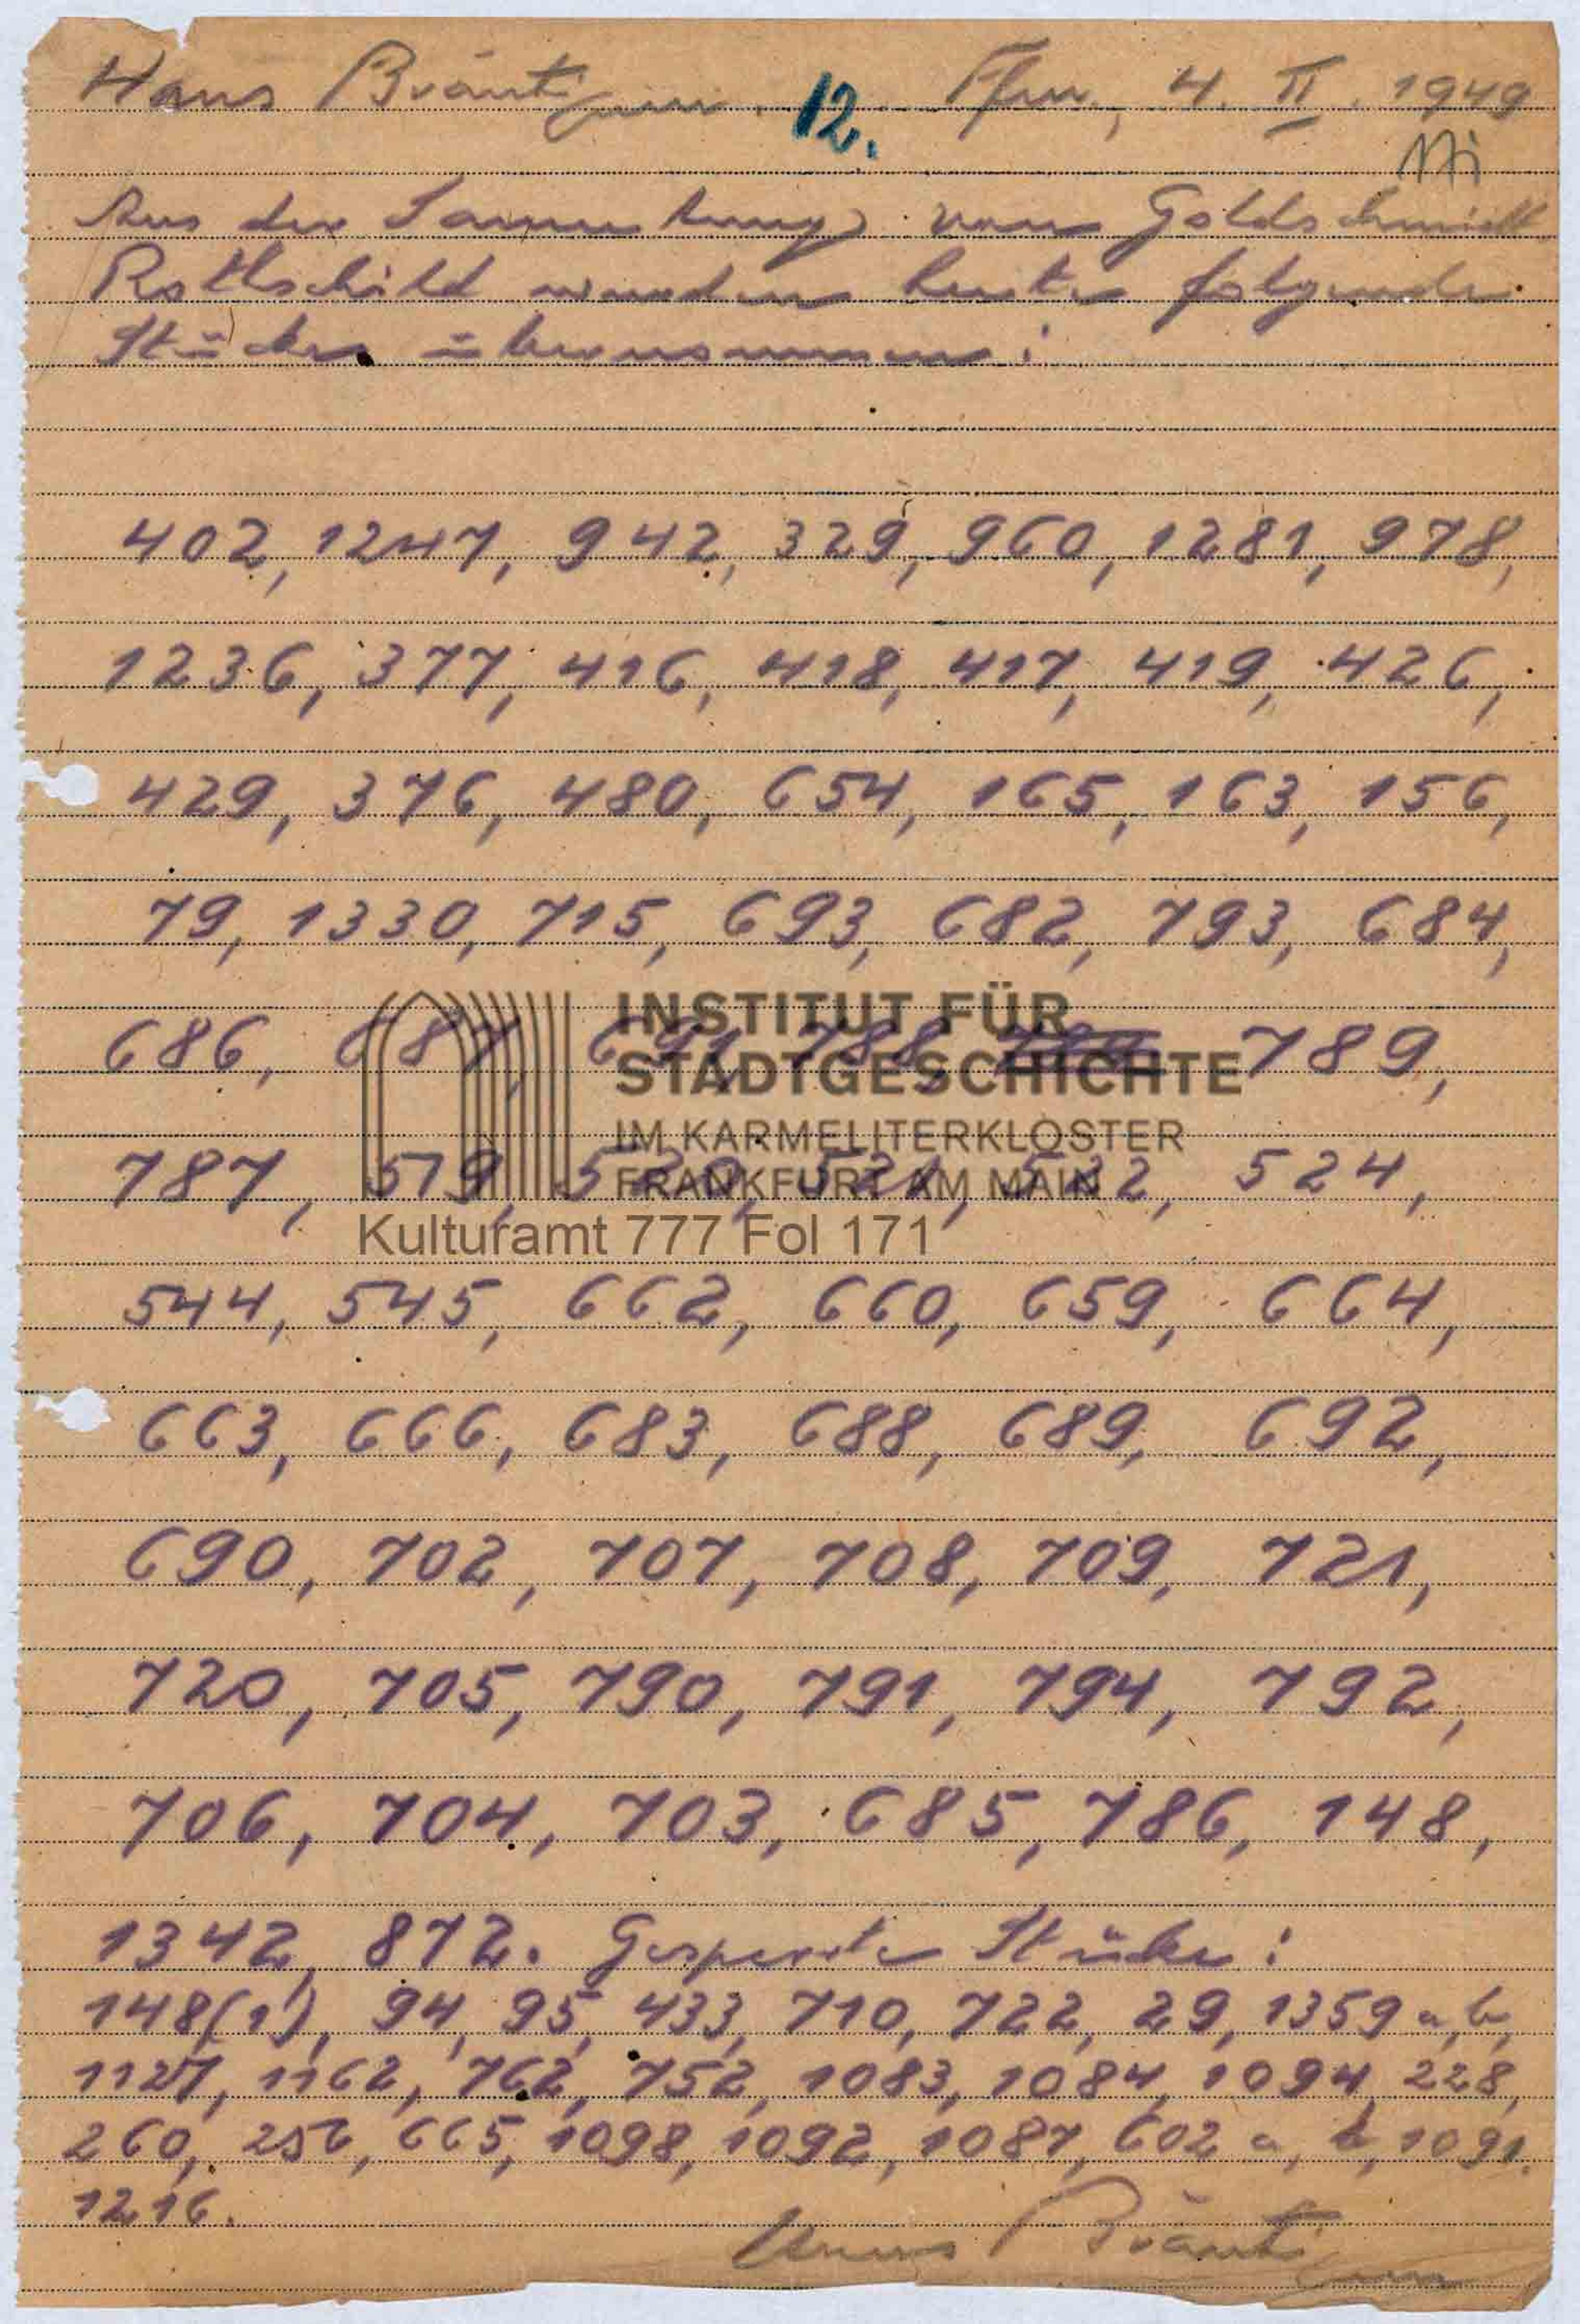 A piece of paper with rows of numbers written on it